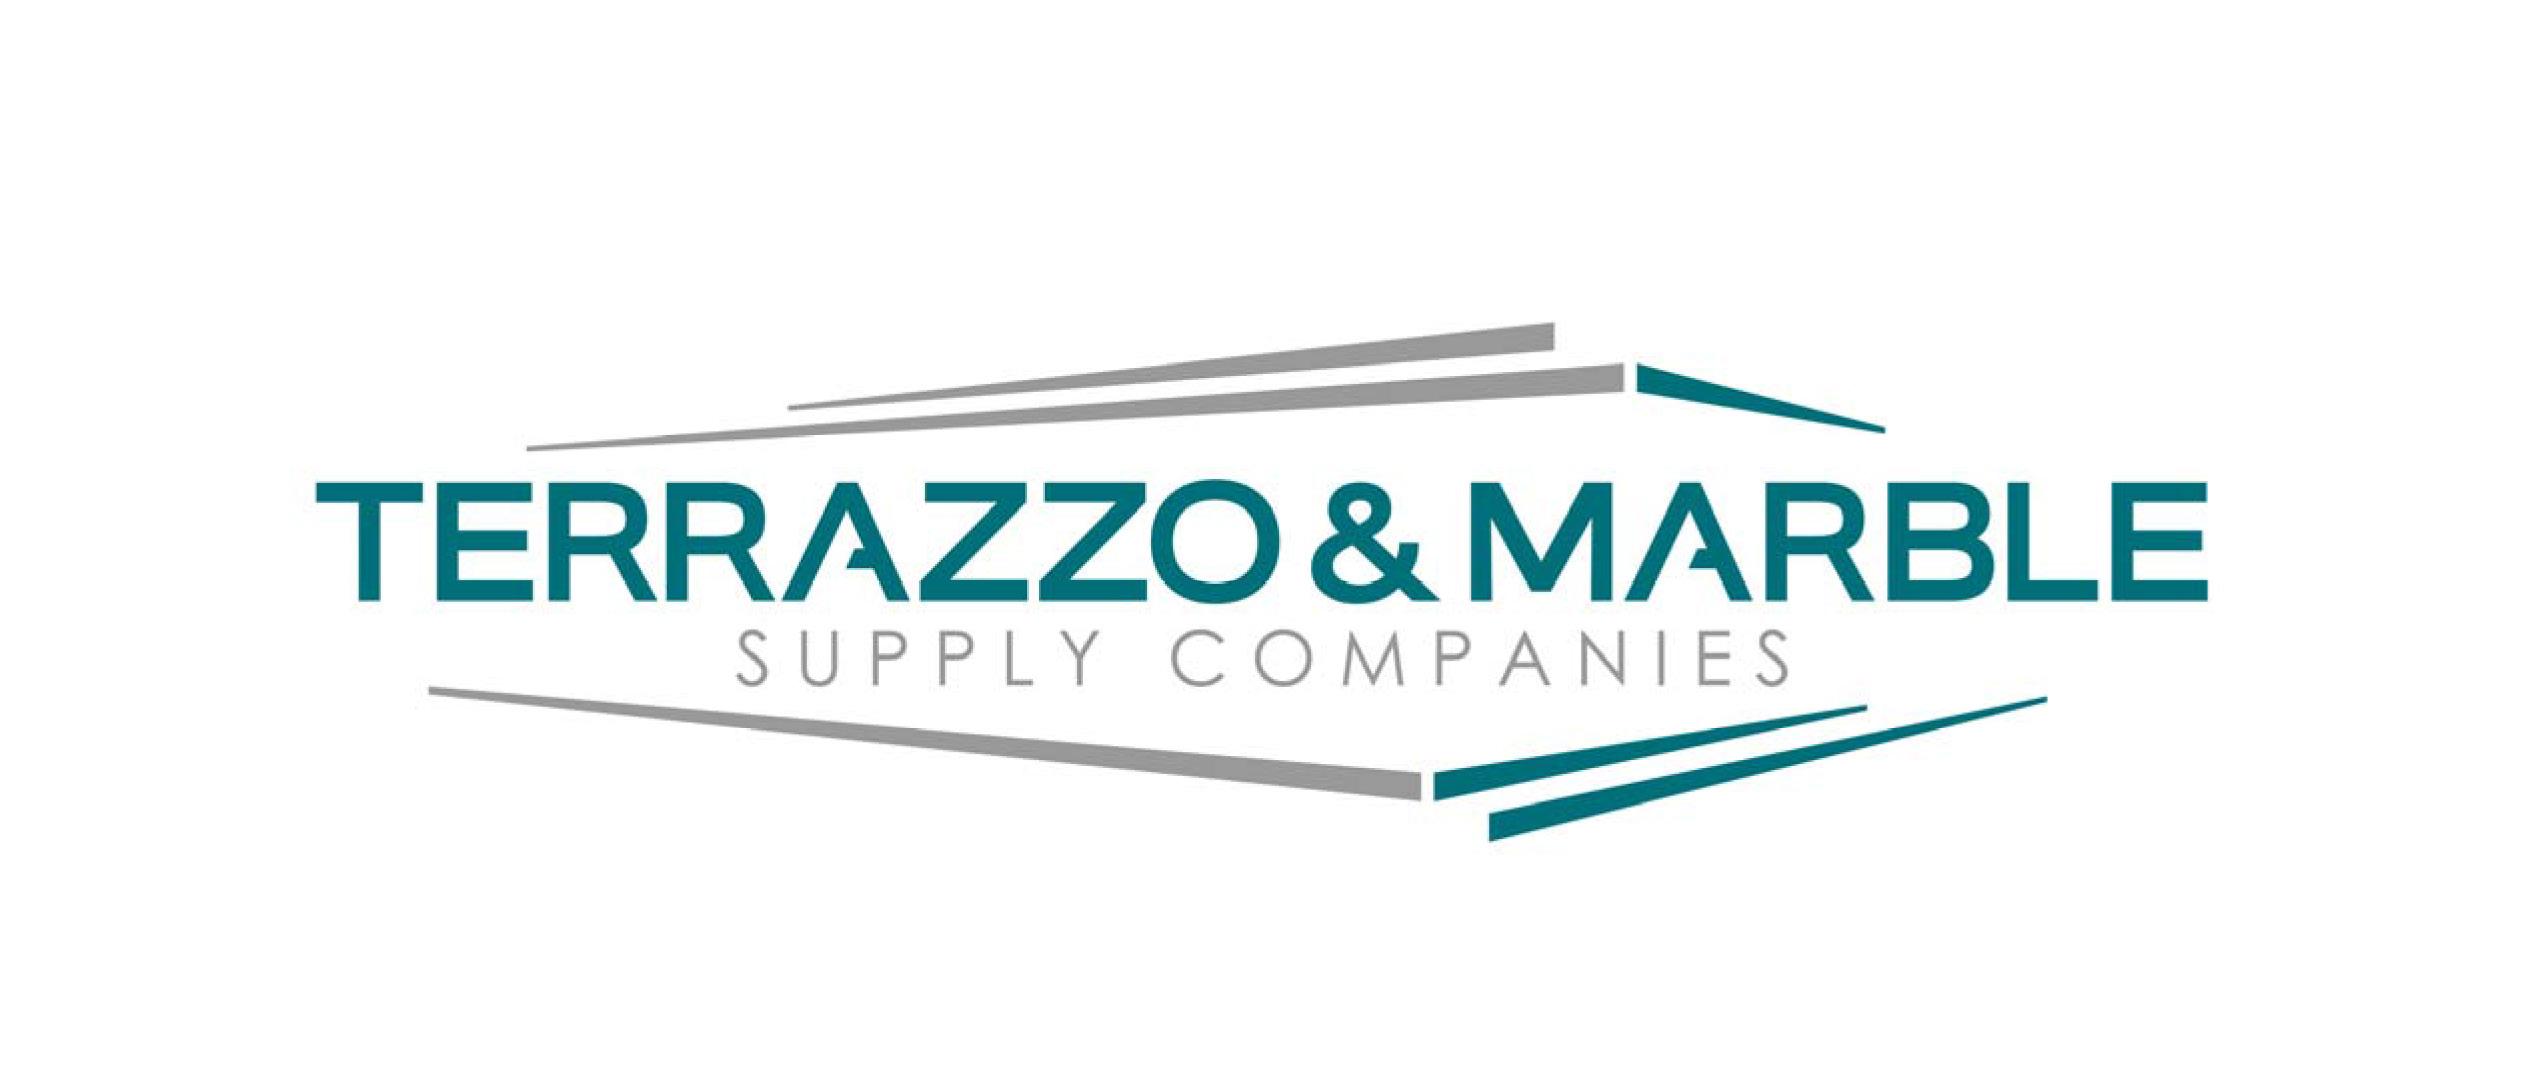 Terrazzo & Marble Supply Companies Golf Outing 2020